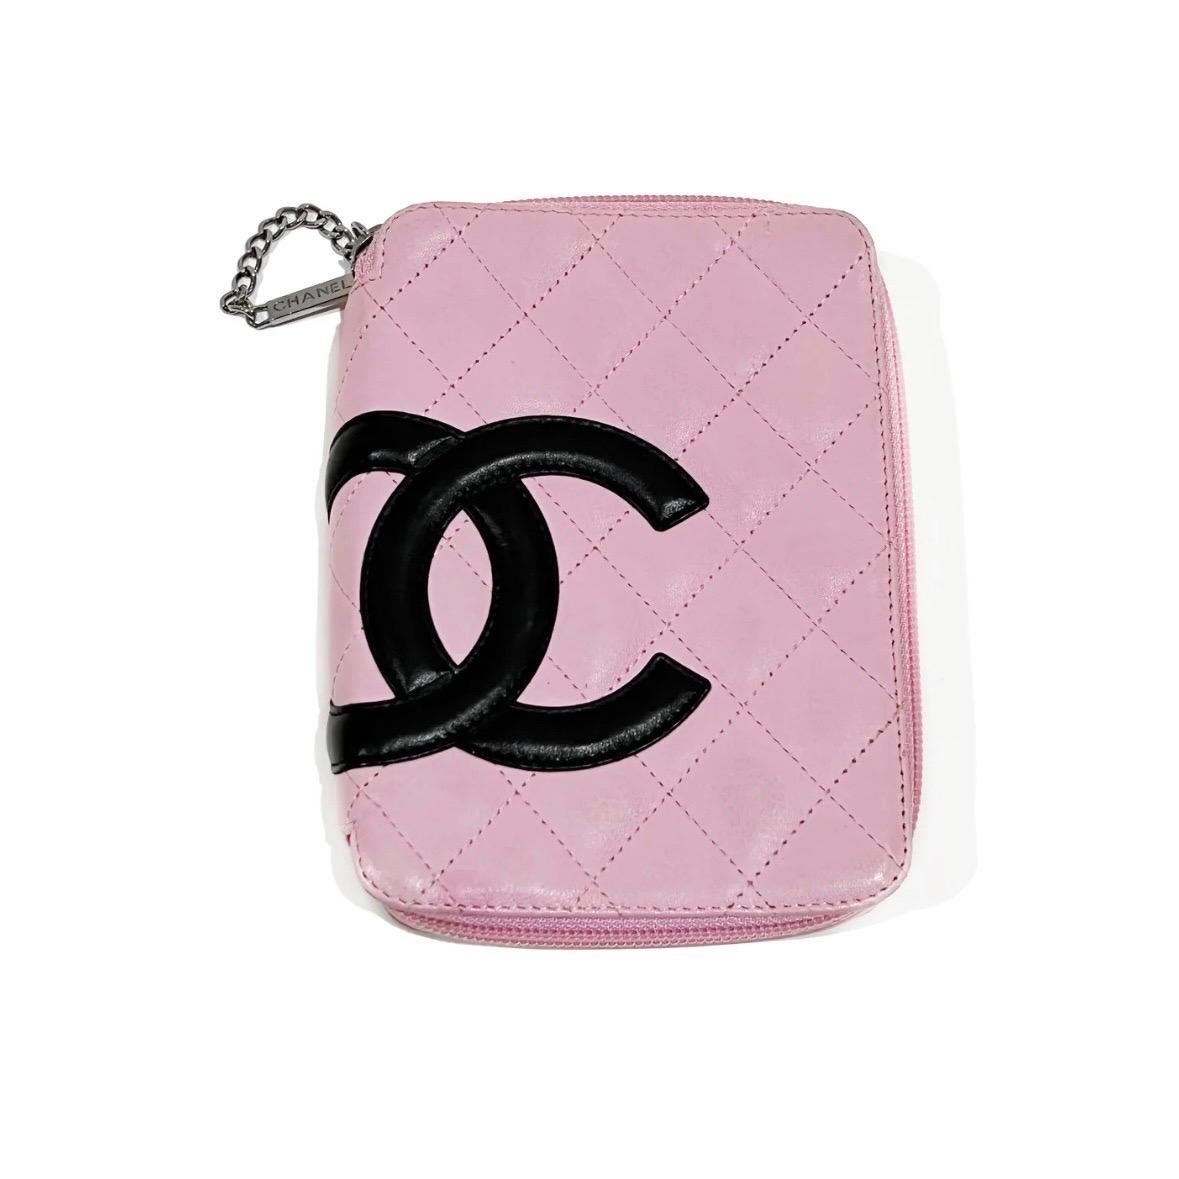 Pink Cosmetic CC Quilted Bag by Chanel
Circa 2004 Ligne Cambon Campaign 
Made in Italy
Pink leather
Quilted detail on leather
Large black CC logo detail
Zip closure with link chain zipper
Silver tone hardware
Back has open pocket
Interior has dual